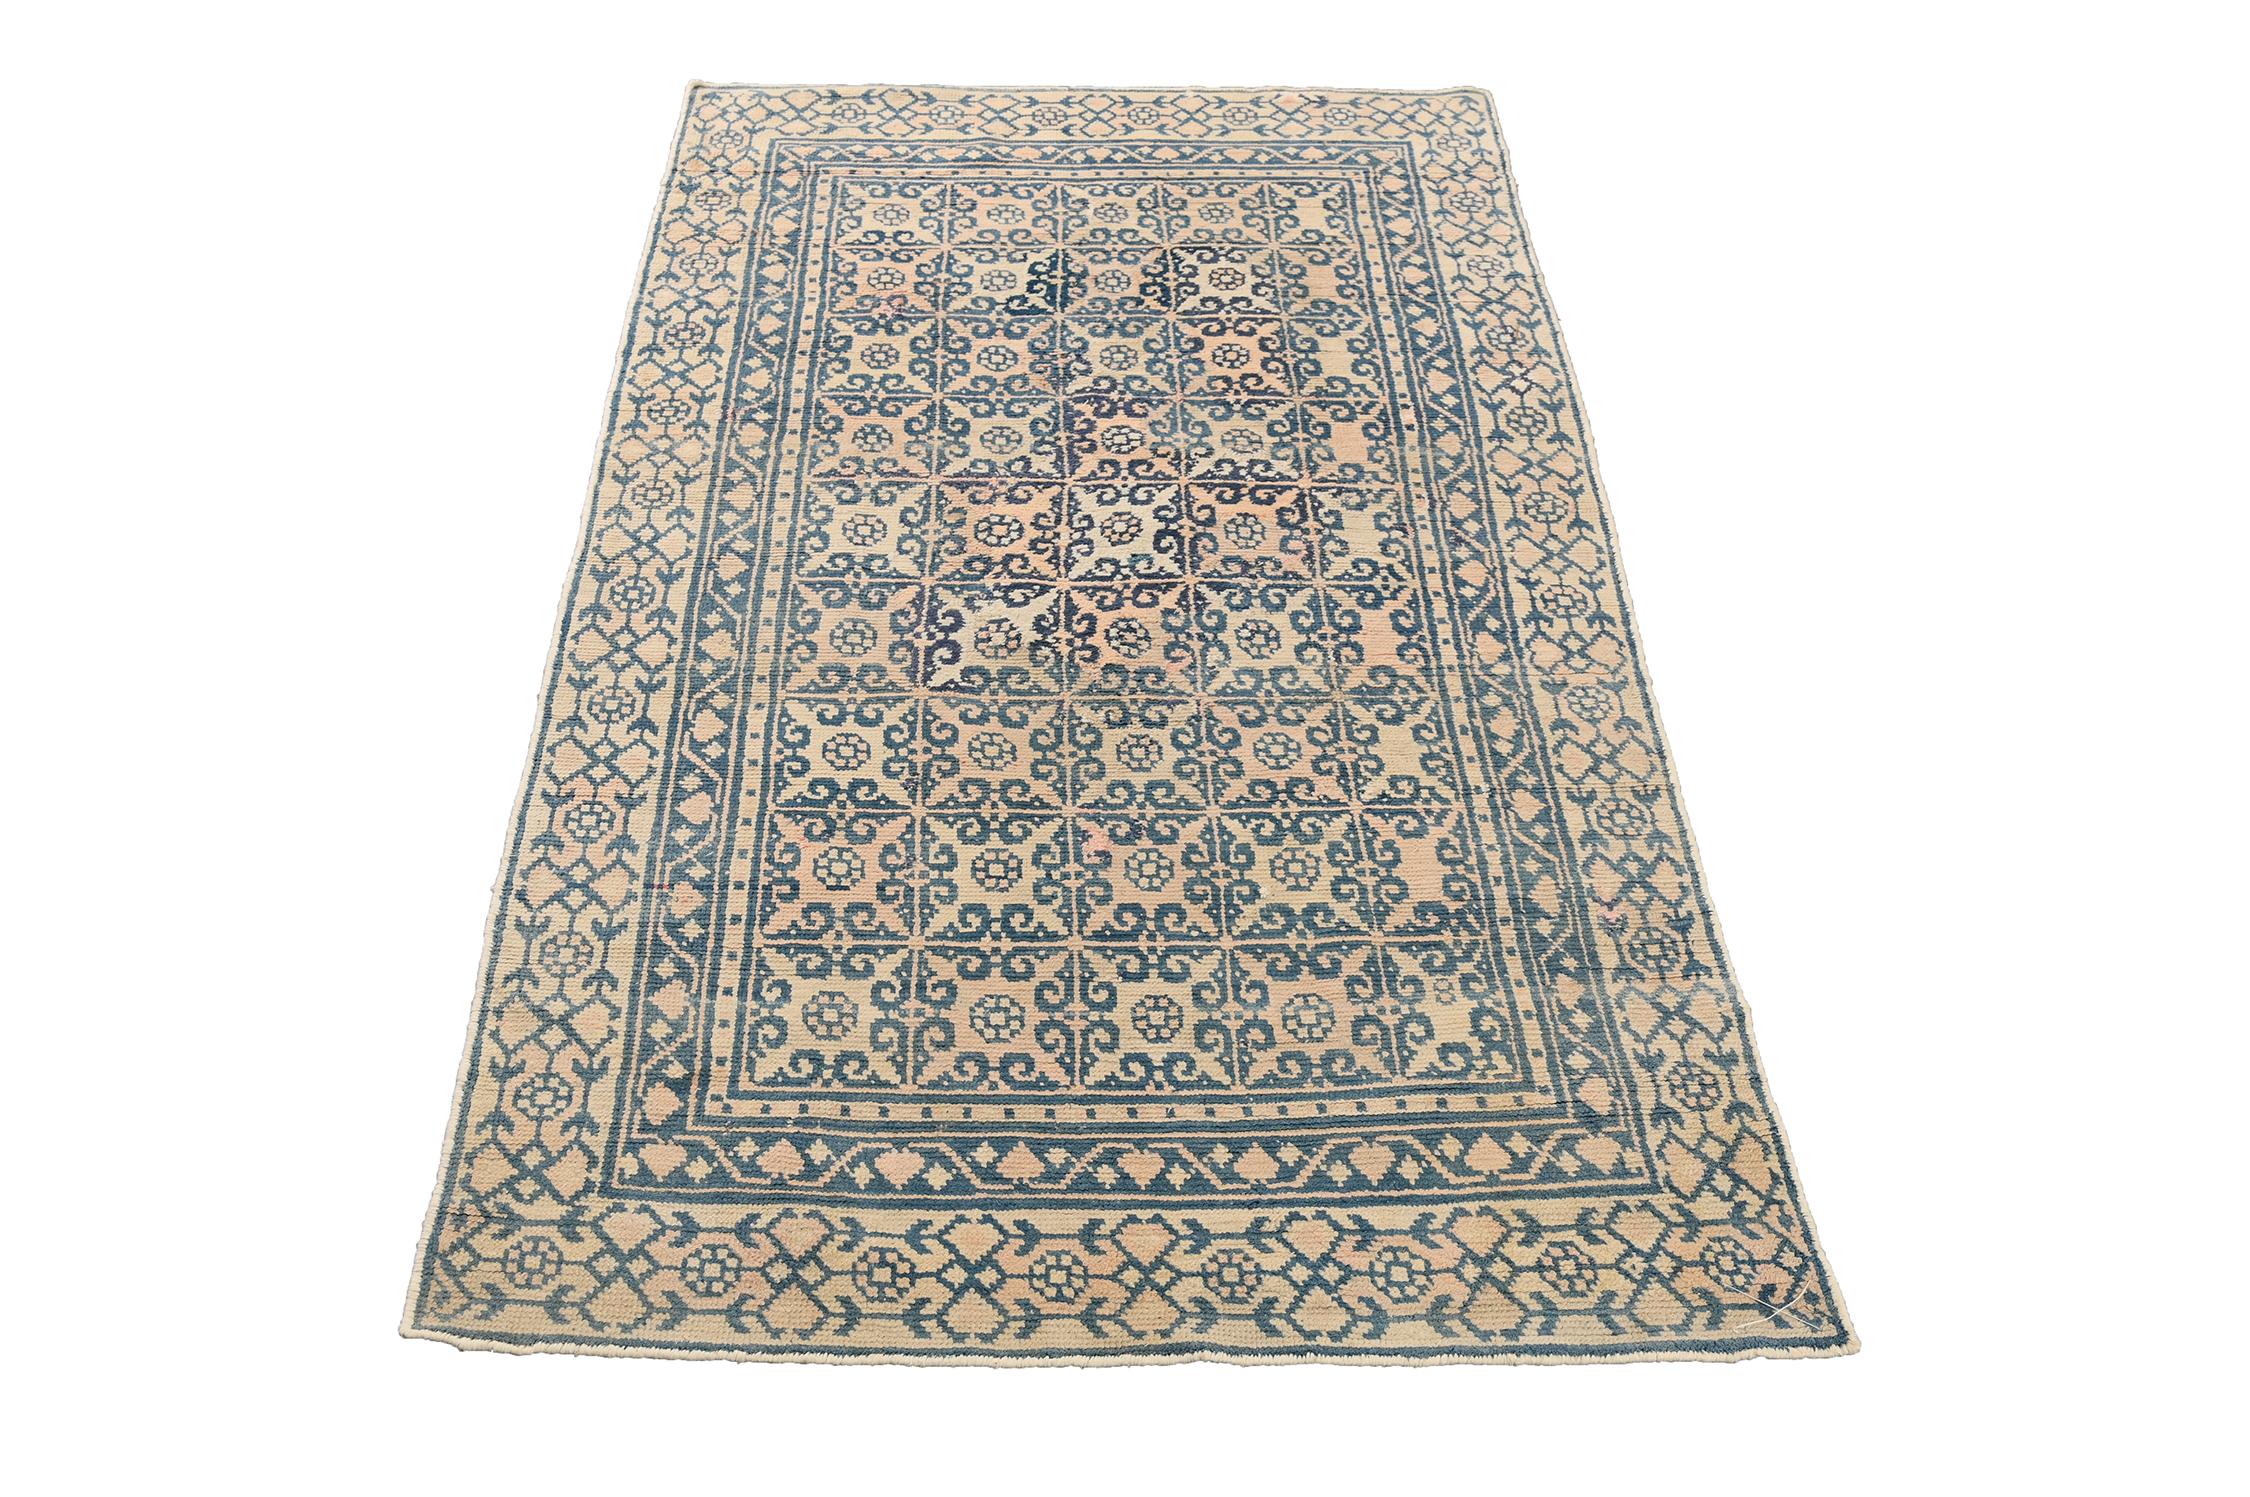 This vintage 4x6 Dhurrie is an exciting new entry in Rug & Kilim's esteemed flat weave collection. Handwoven in cotton, it originates from India circa 1950-1960. 

Further on the Design:

This flat weave prefers geometric-floral patterns in blue